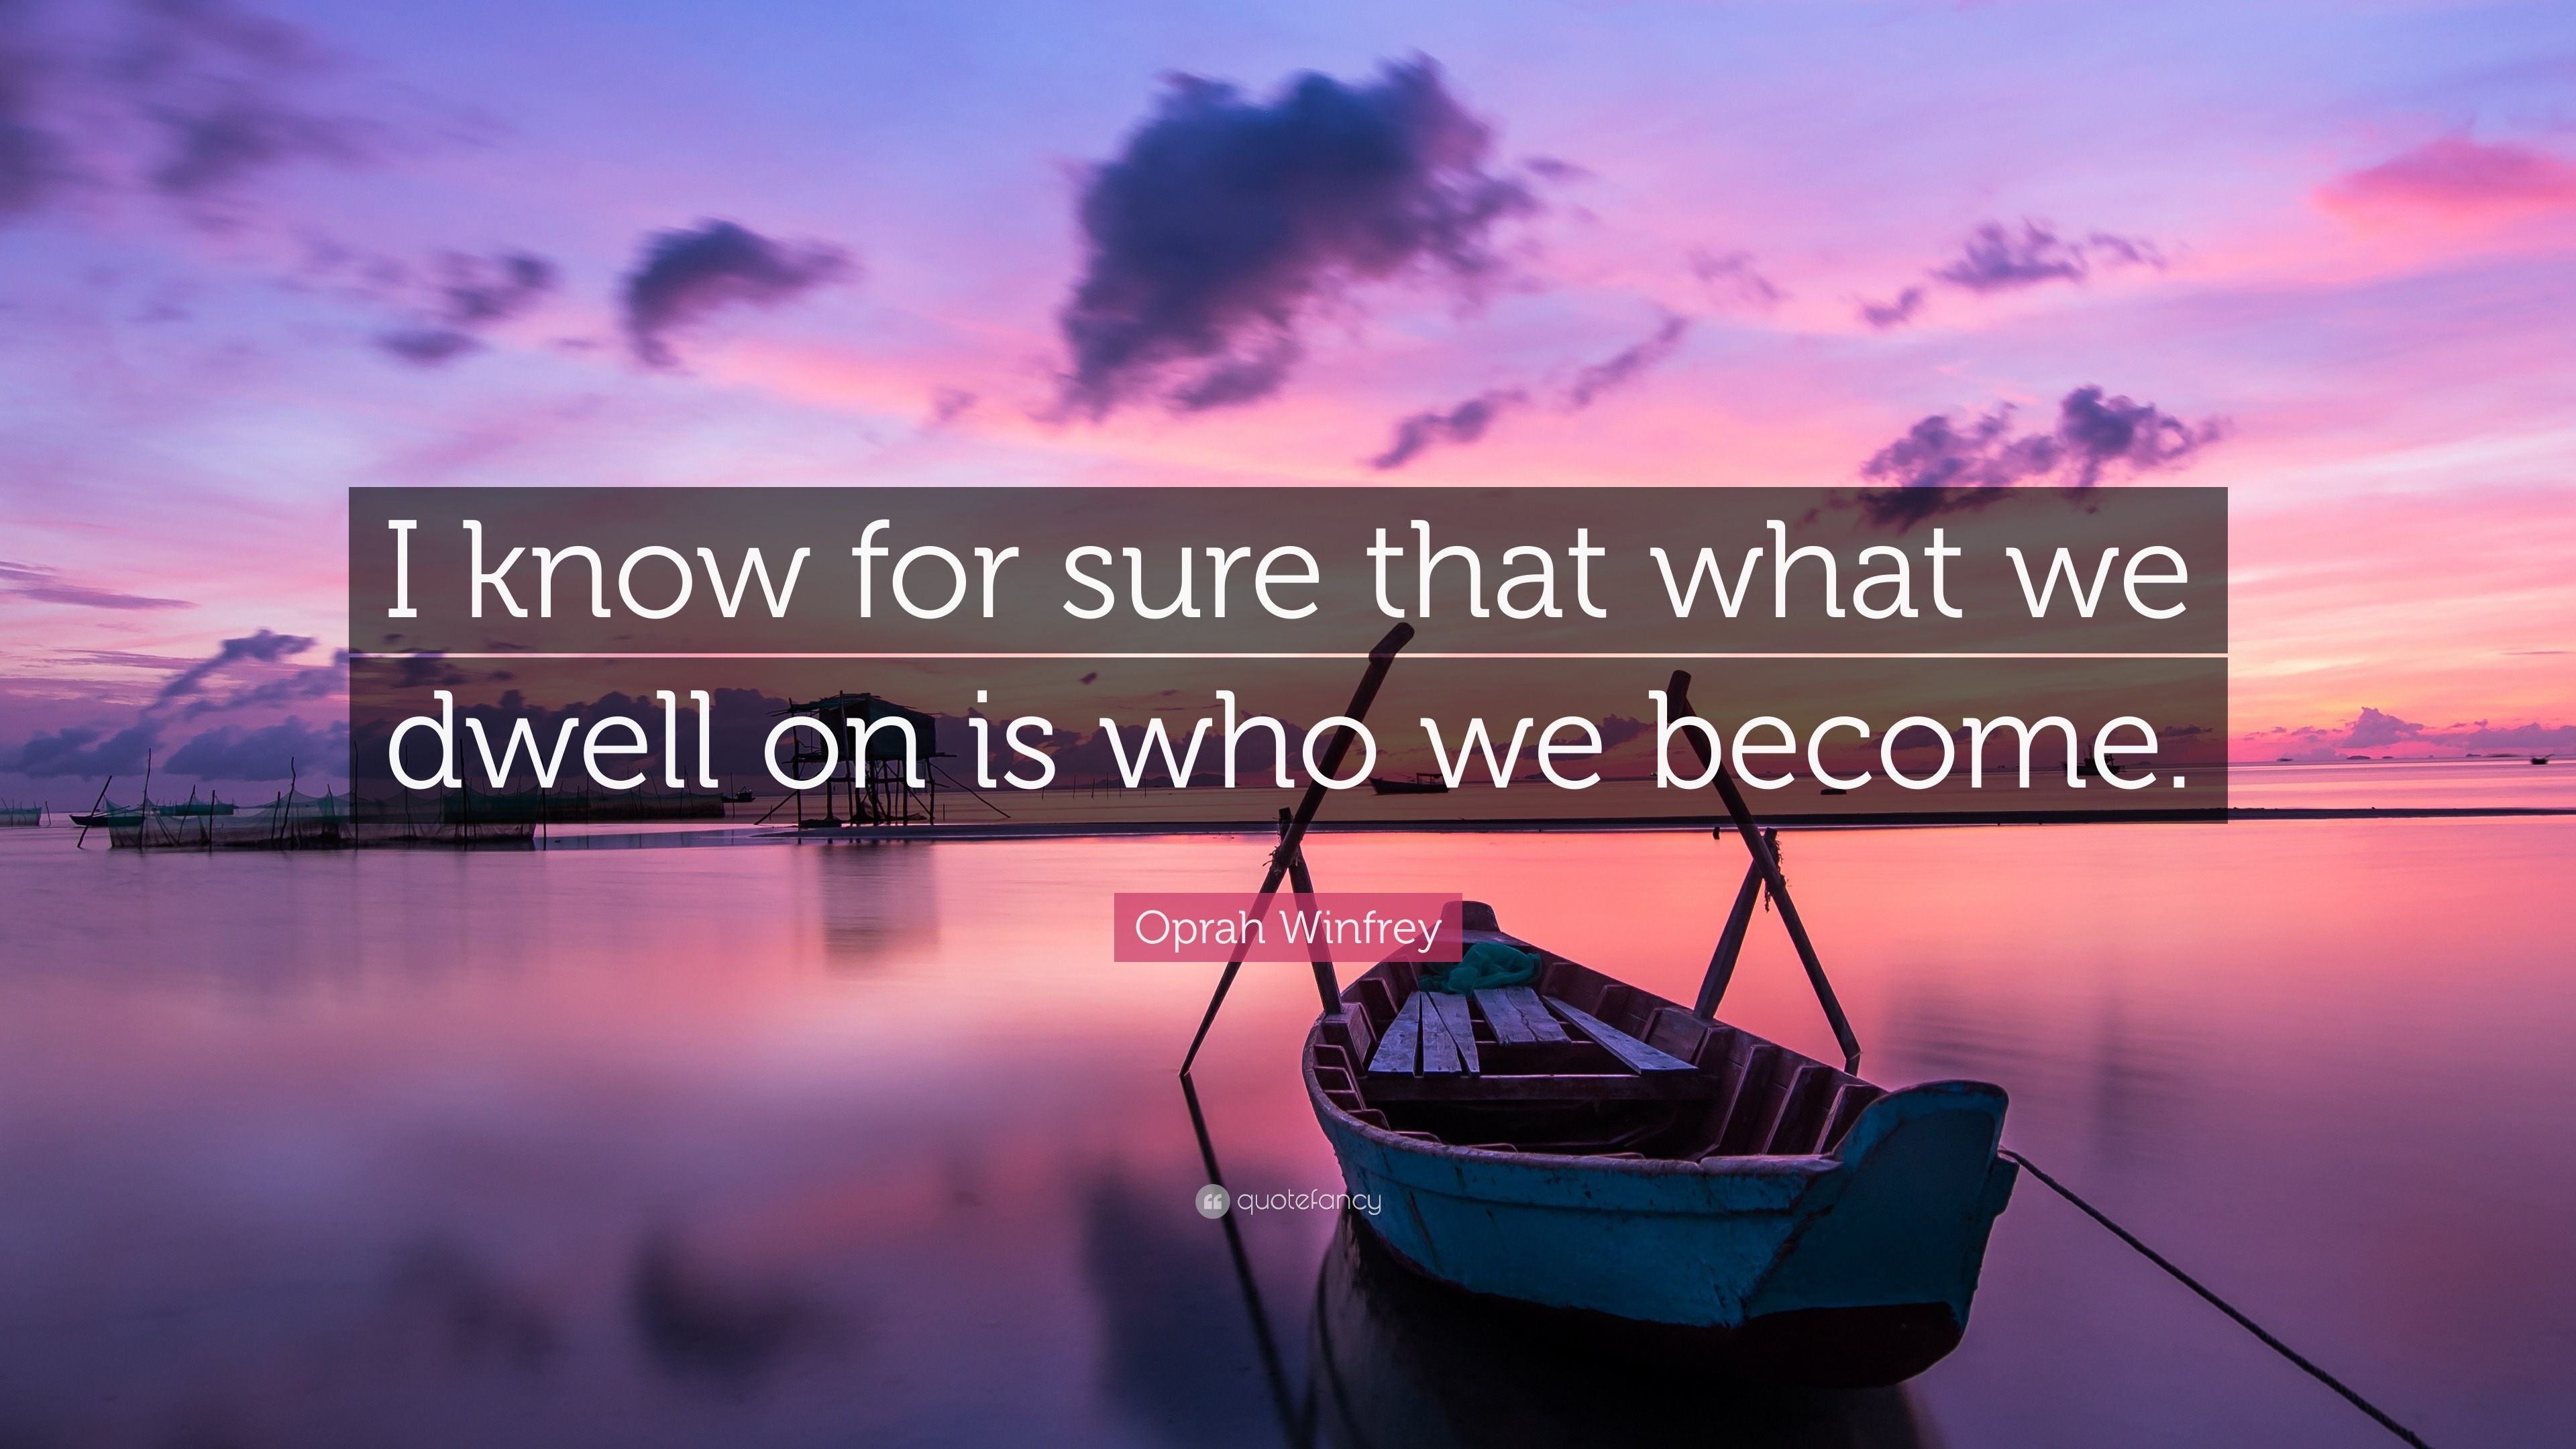 Oprah Winfrey Quote: “I know for sure that what we dwell on is who we ...